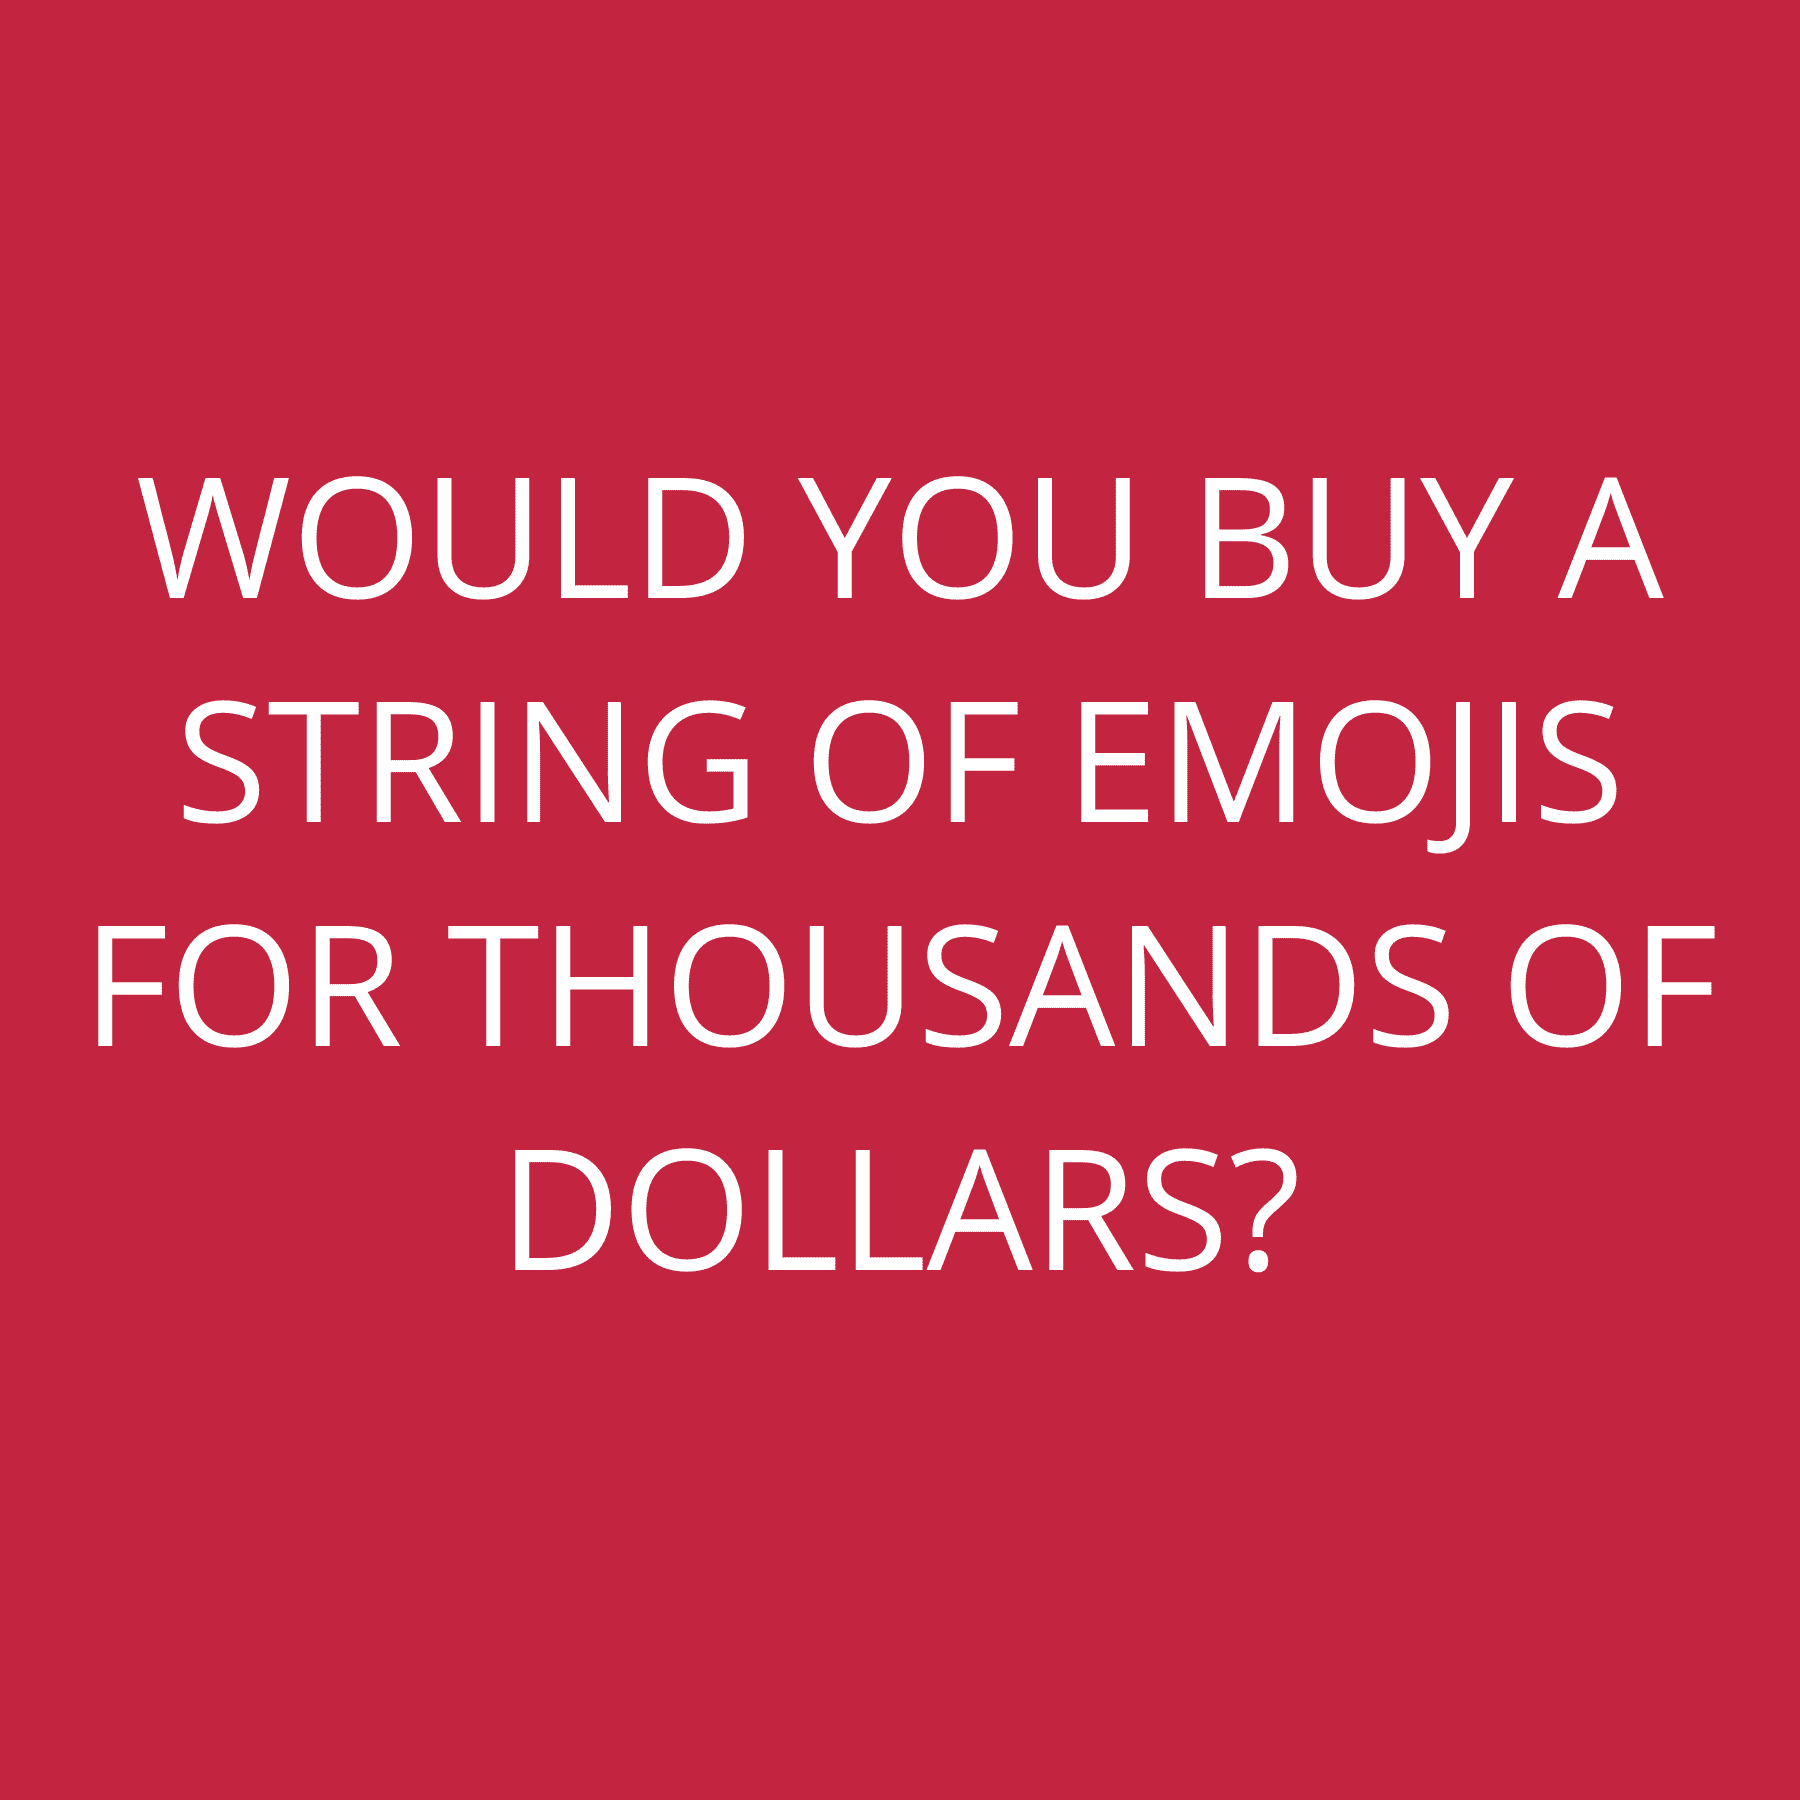 Would you buy a string of Emojis for thousands of dollars?